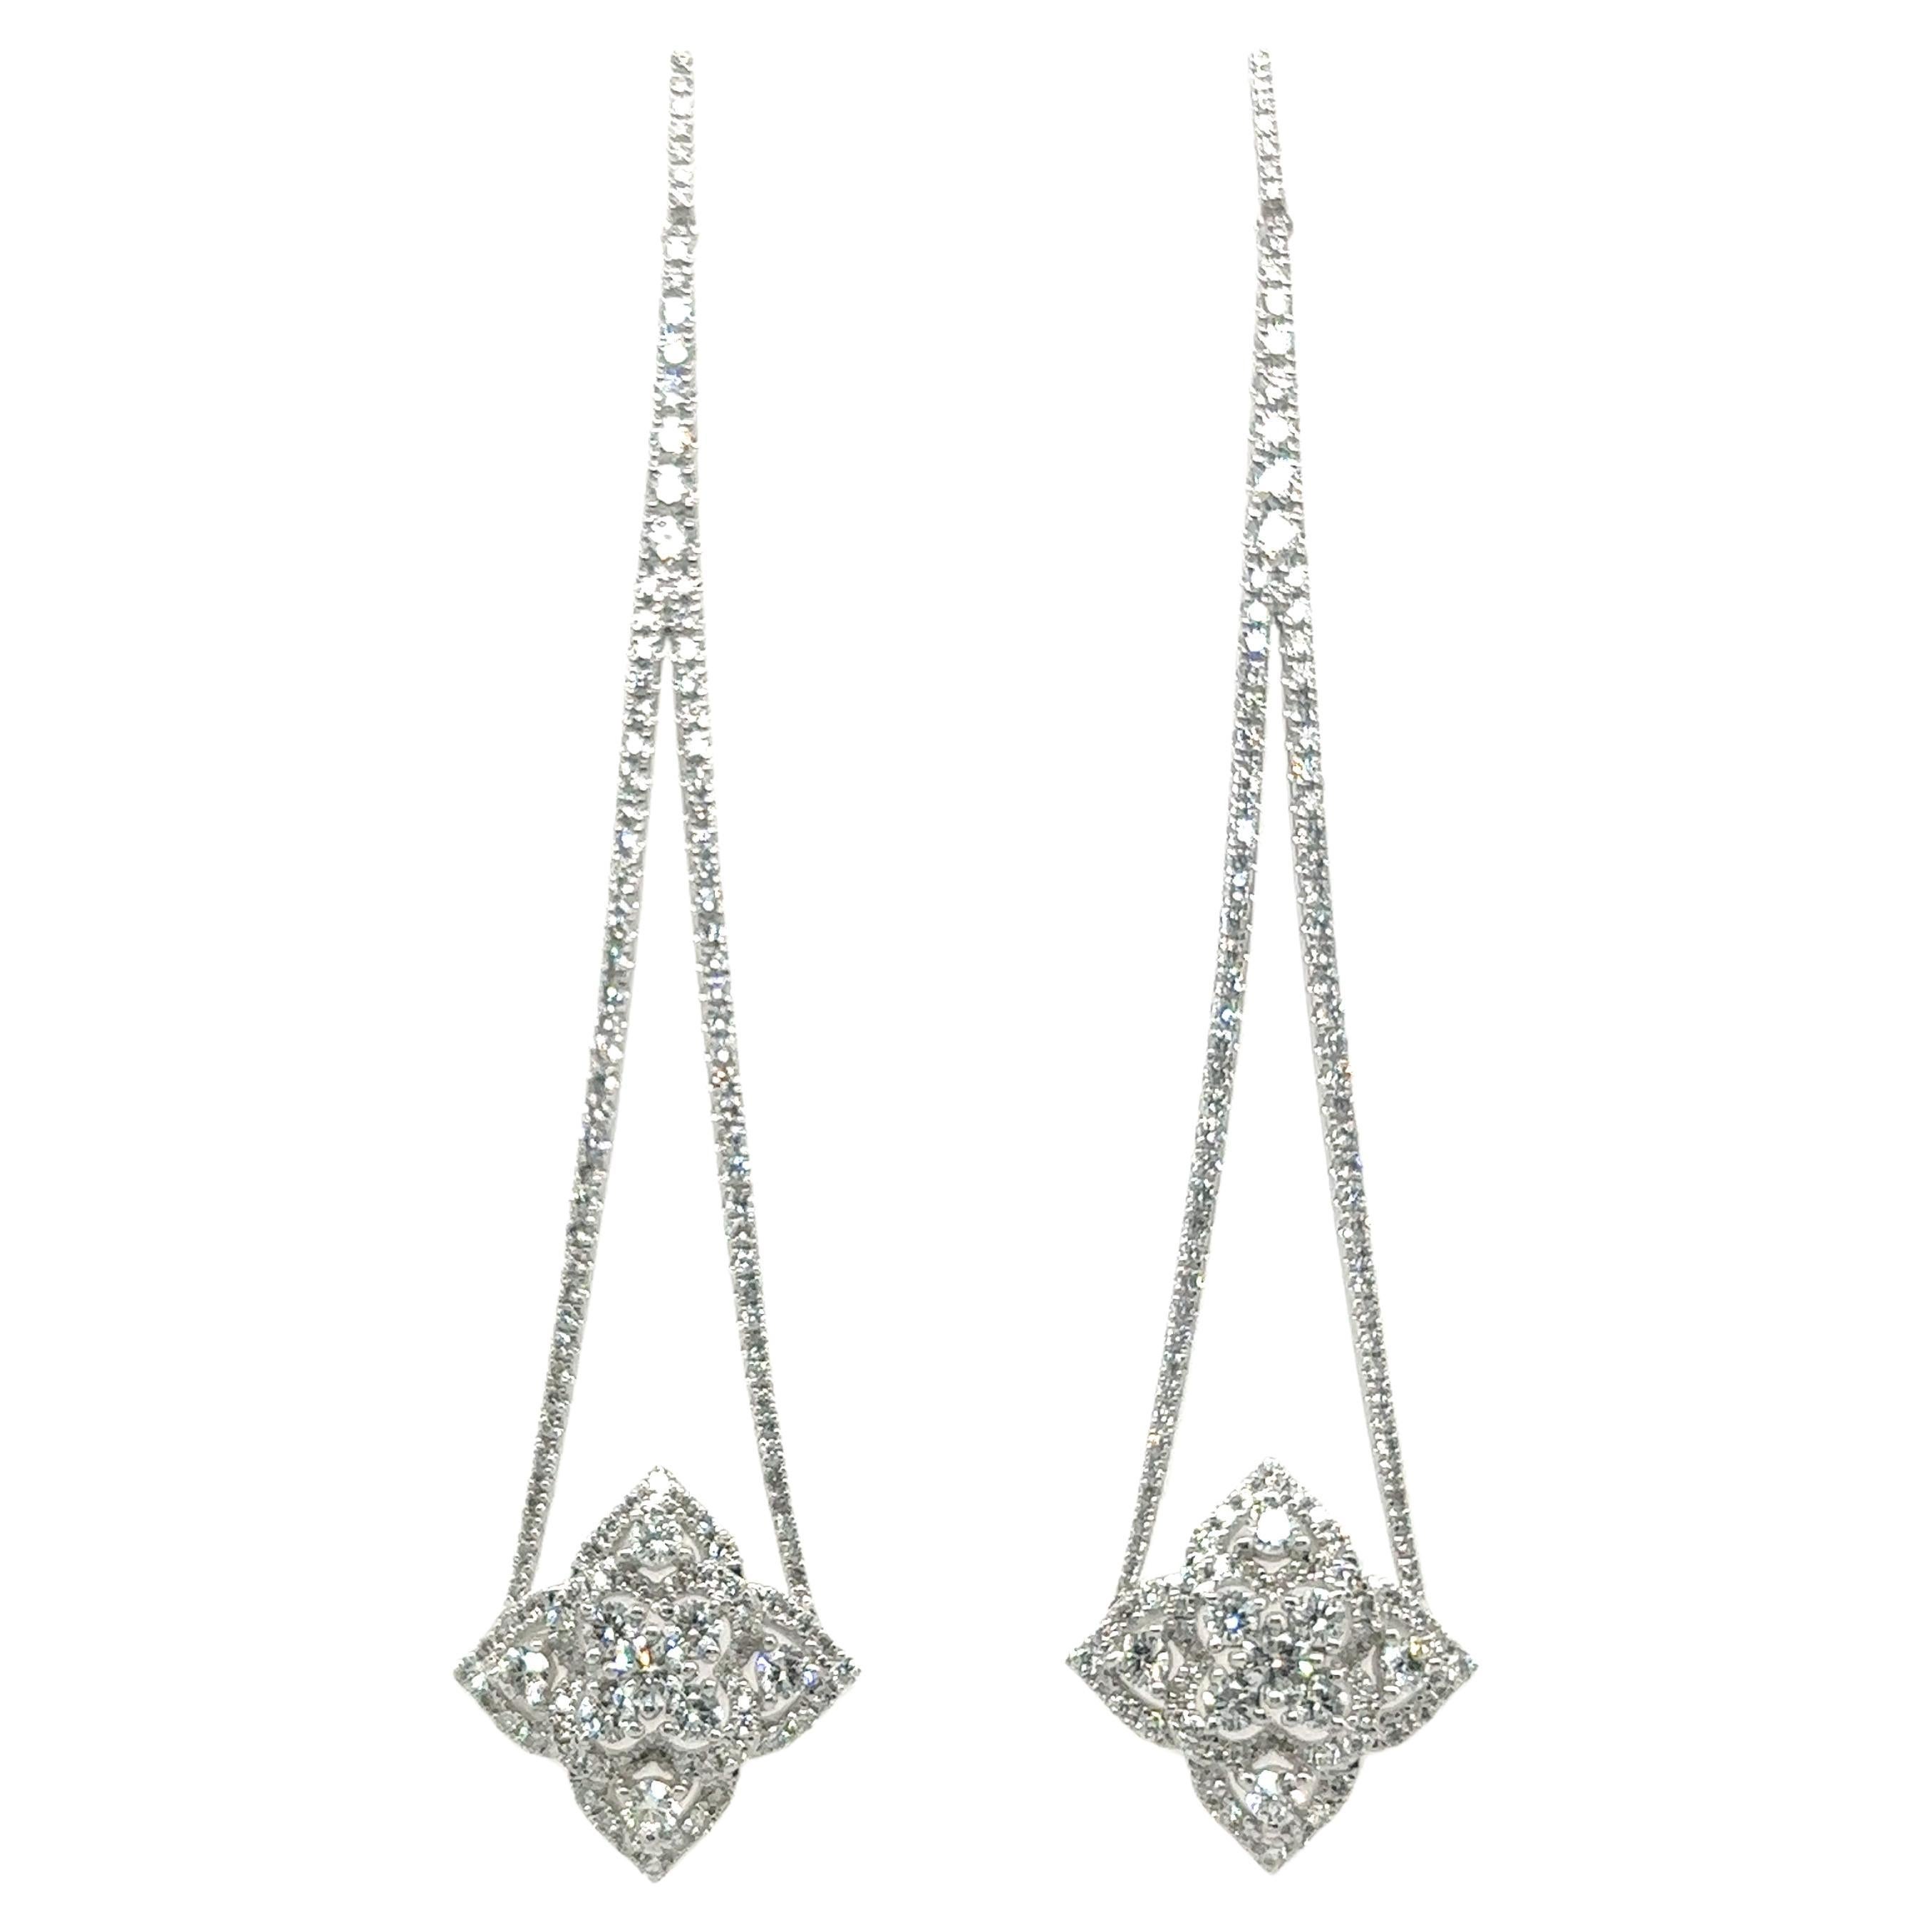 These exquisite dangle earrings with diamonds in 18 Karat white gold embody a harmonious blend of elegance and architectural inspiration. 

Their design seems to draw inspiration from the delicate beauty of the Gothic cathedrals, forming a